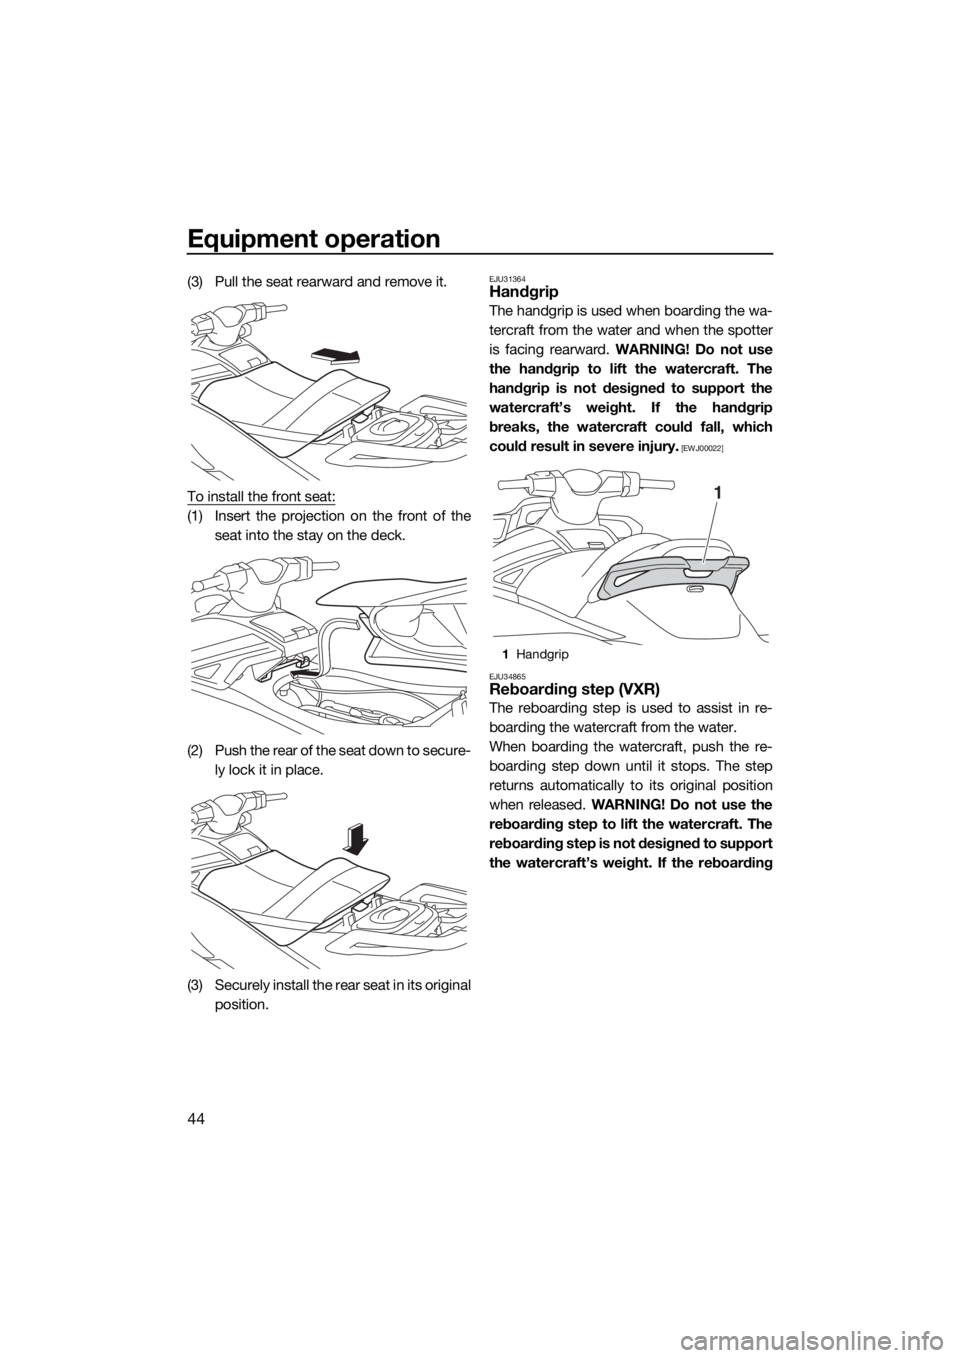 YAMAHA VXS 2015 Service Manual Equipment operation
44
(3) Pull the seat rearward and remove it.
To install the front seat:
(1) Insert the projection on the front of the
seat into the stay on the deck.
(2) Push the rear of the seat 